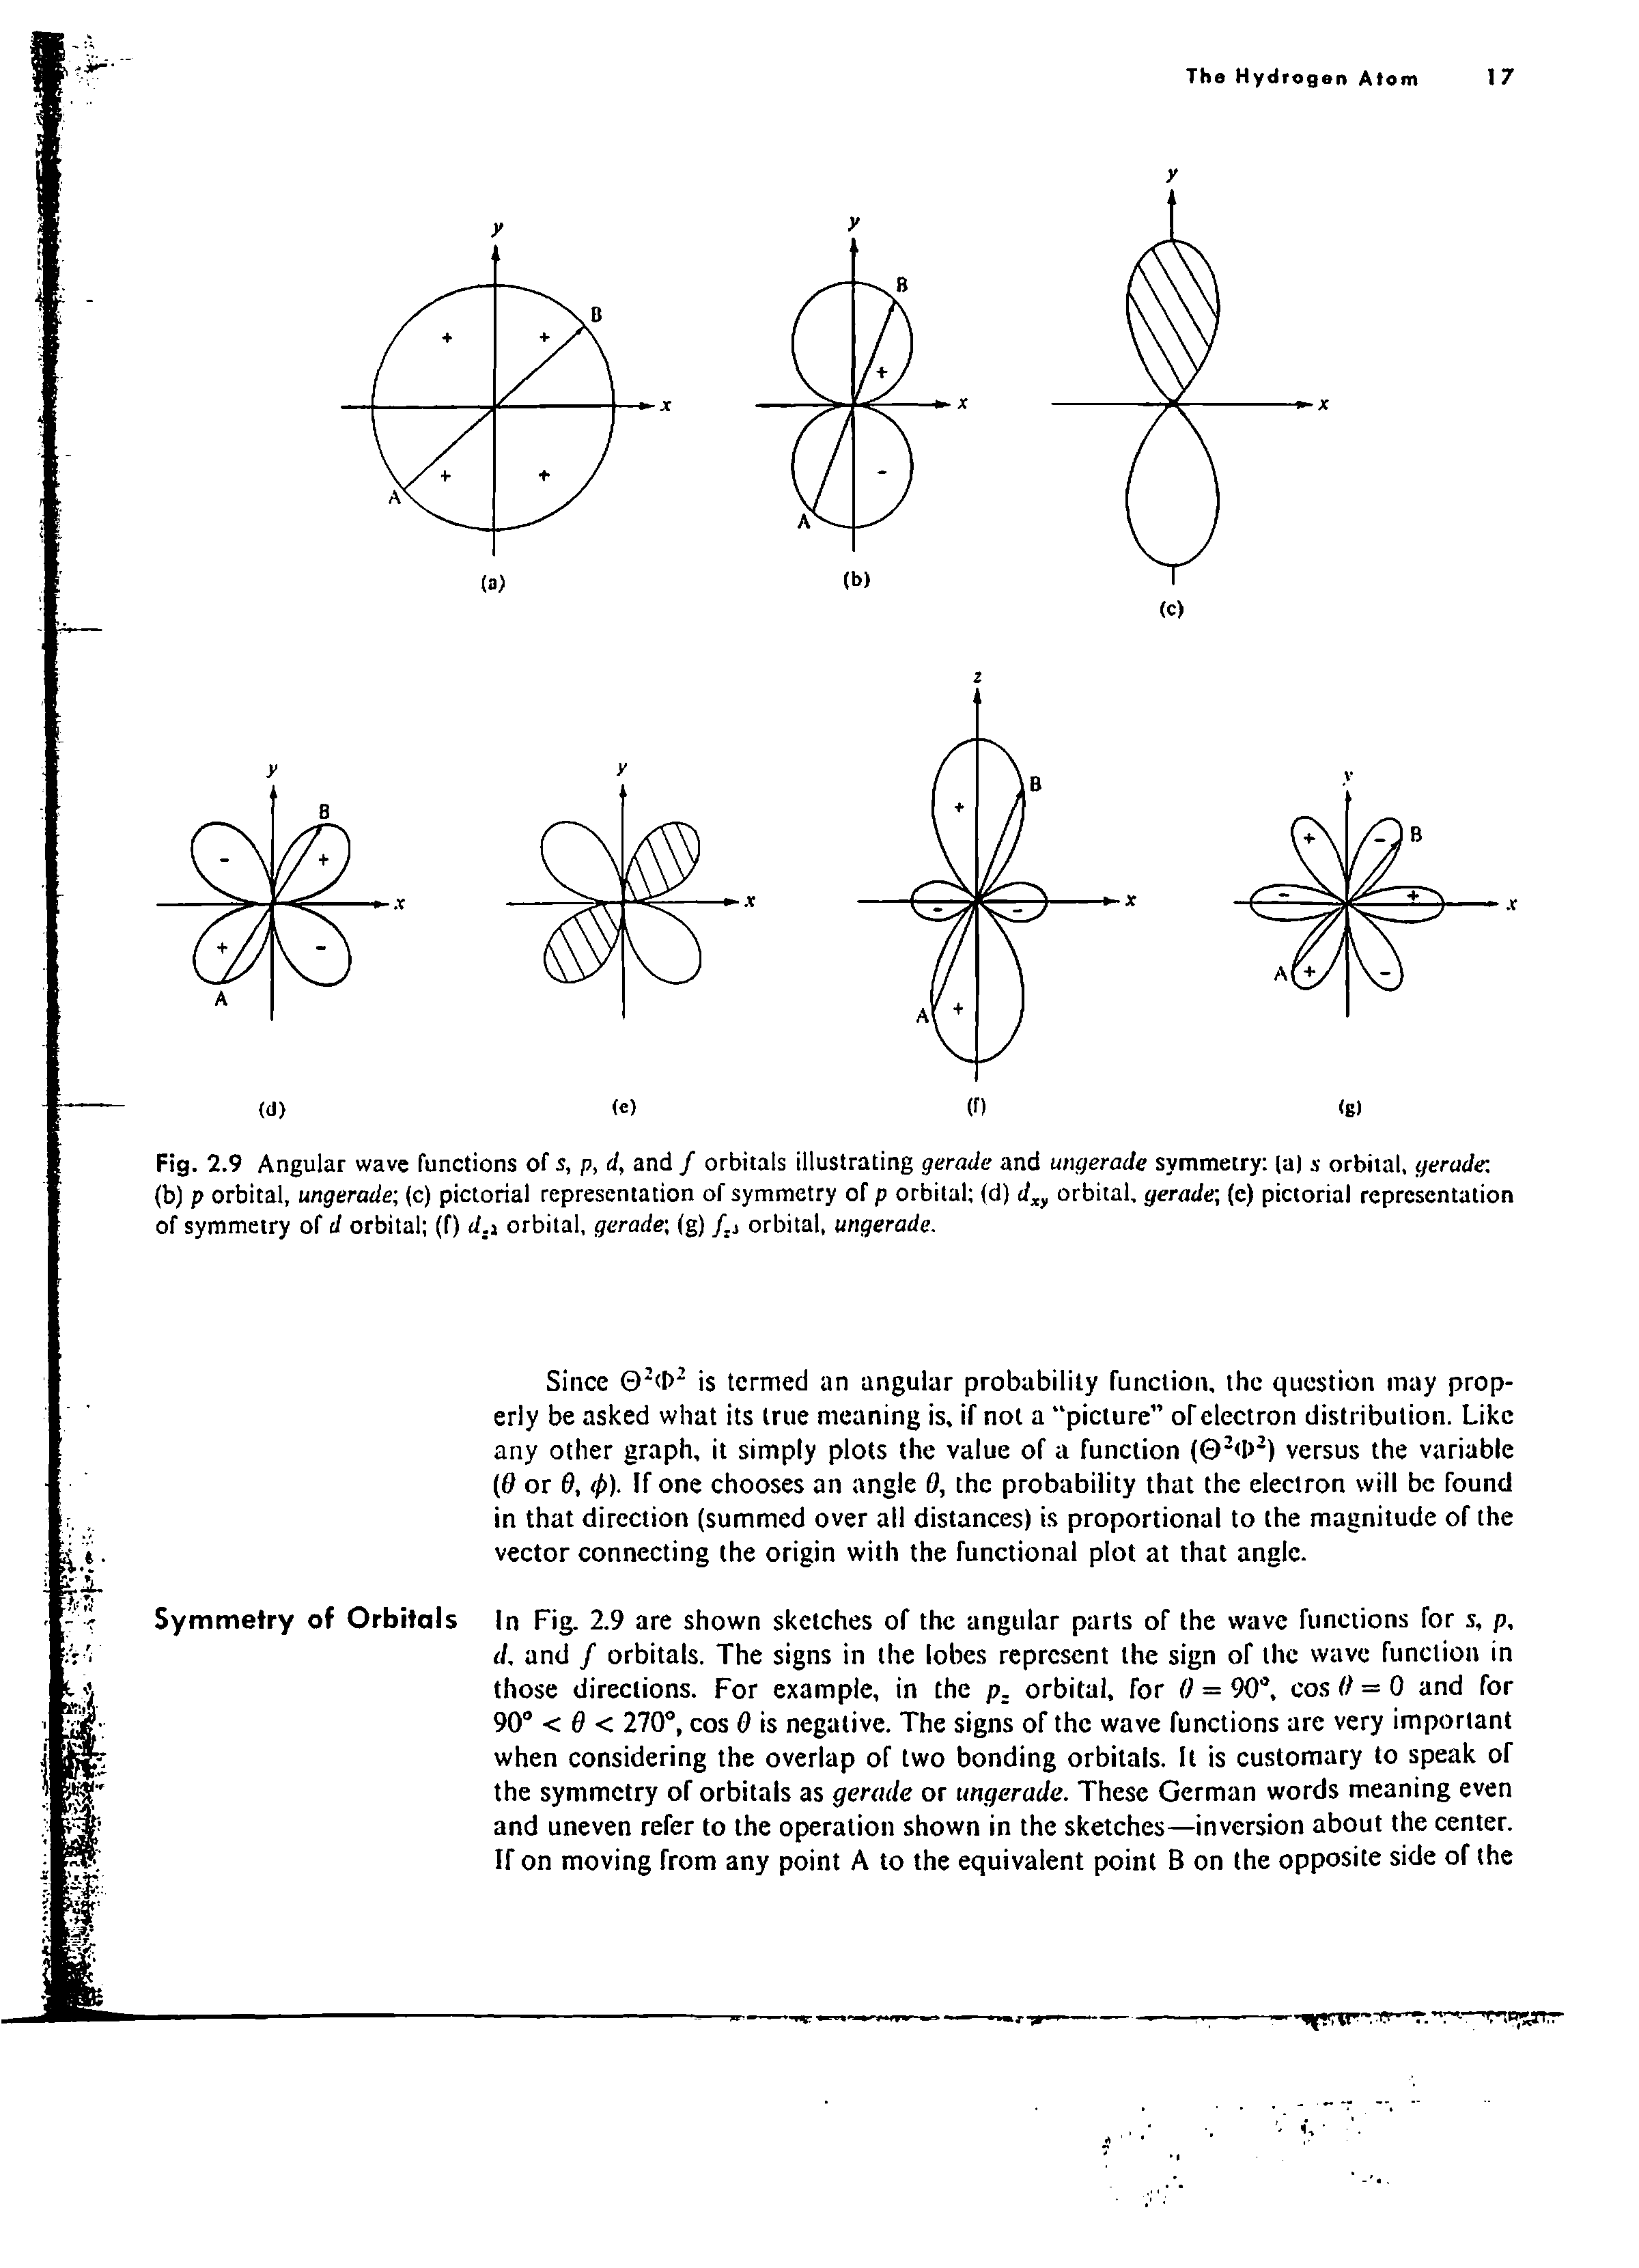 Fig. 2.9 Angular wave functions of s, p, d, and / orbitals illustrating gerade and ungerade symmetry (a) s orbital, gerade (b) p orbital, ungerade-, (c) pictorial representation of symmetry of p orbital (d) orbital, gerade-, (e) pictorial representation of symmetry of d orbital (f) d.i orbital, gerade-, (g) / j orbital, ungerade.